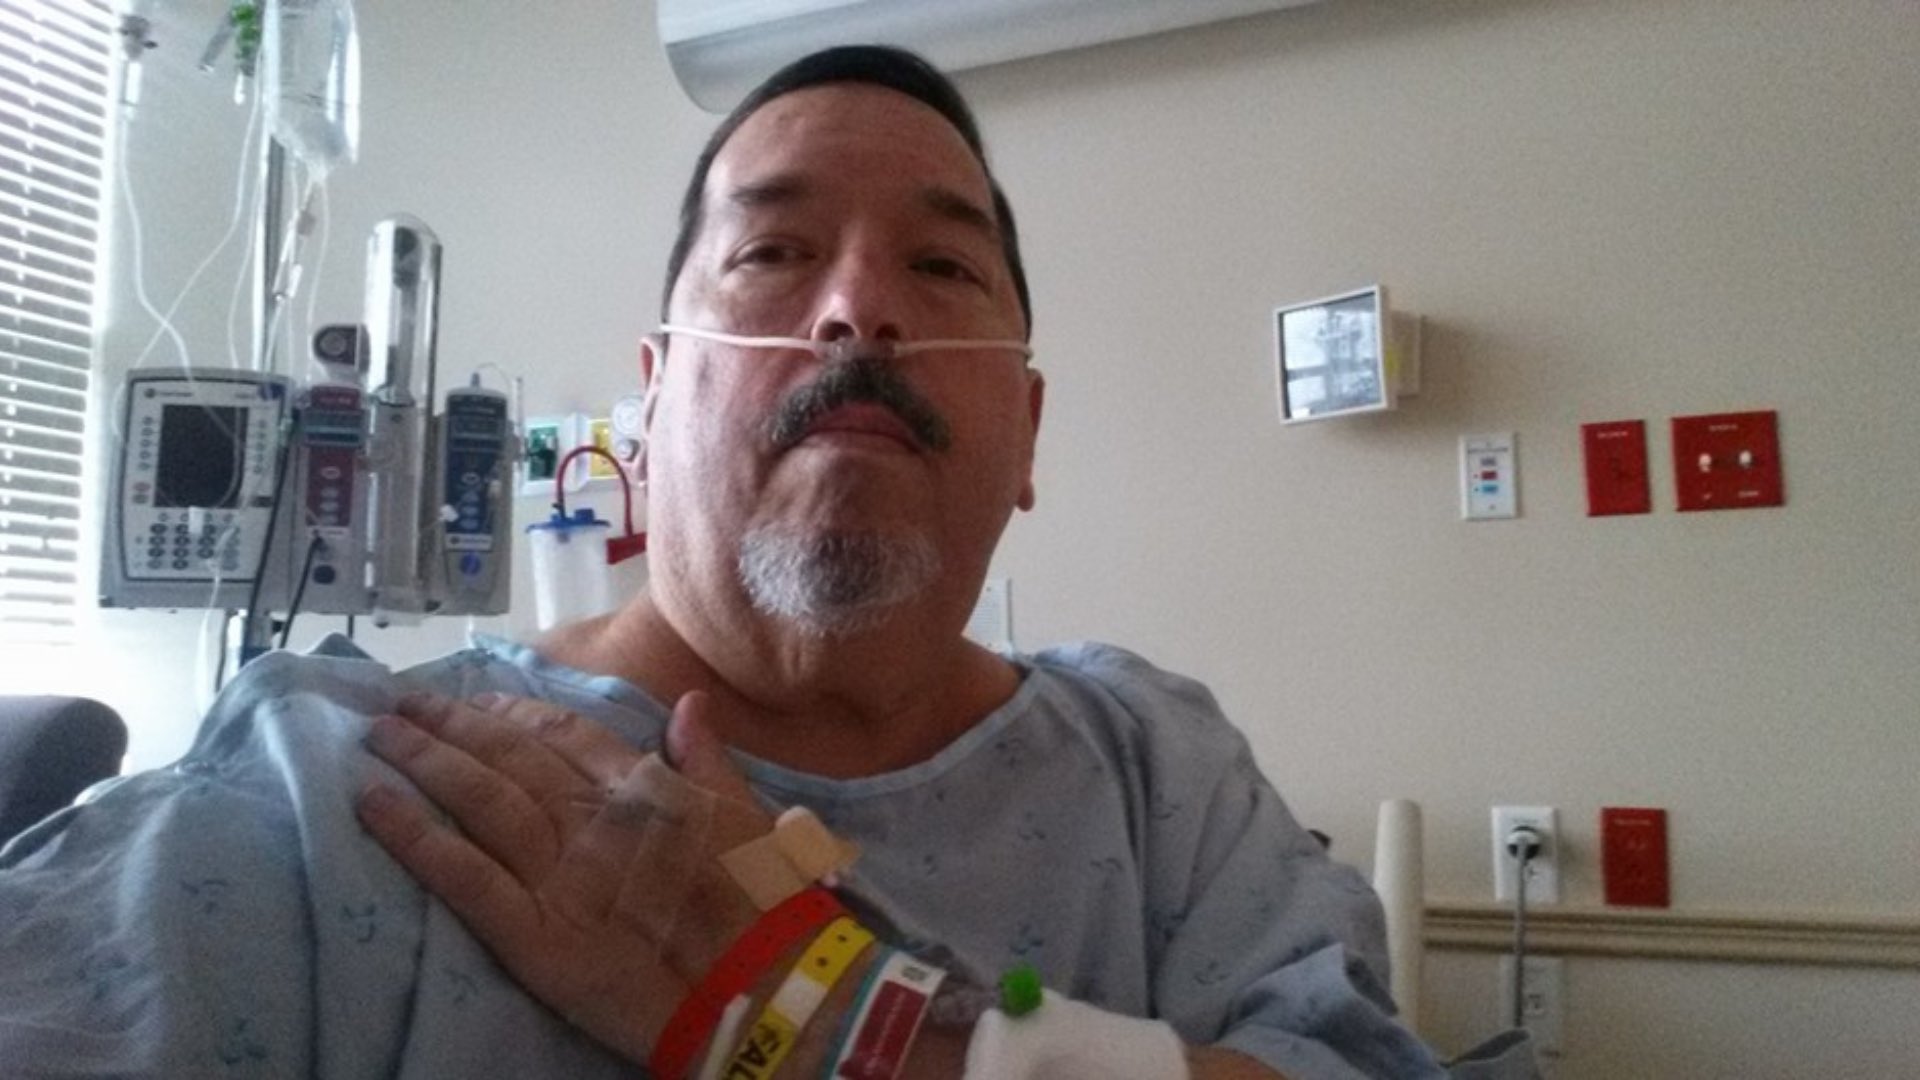 Don Shippey: From Stage IV to Six Years Cancer-Free After Receiving HAI Pump